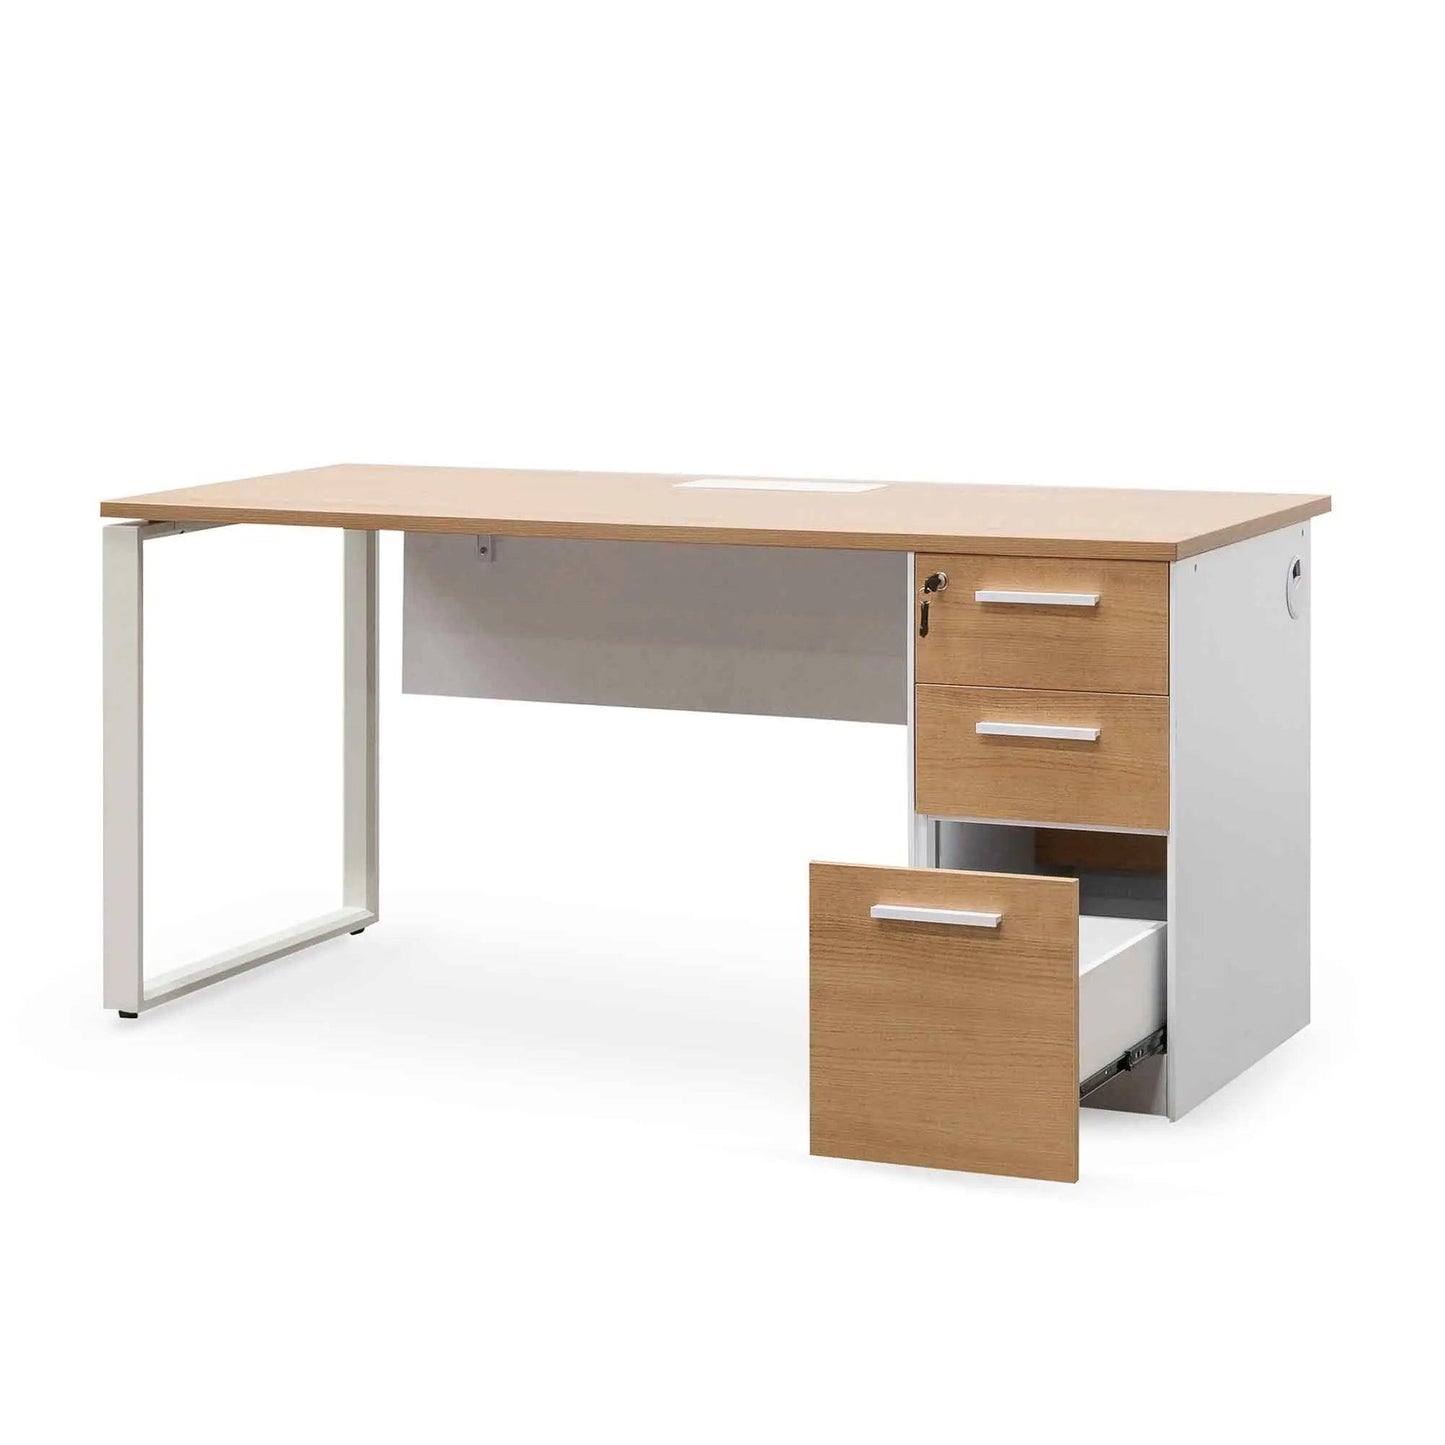 Calibre 1 Seater Office Desk - Natural and White OT6541-SN - Office DesksOT6541-SN 3